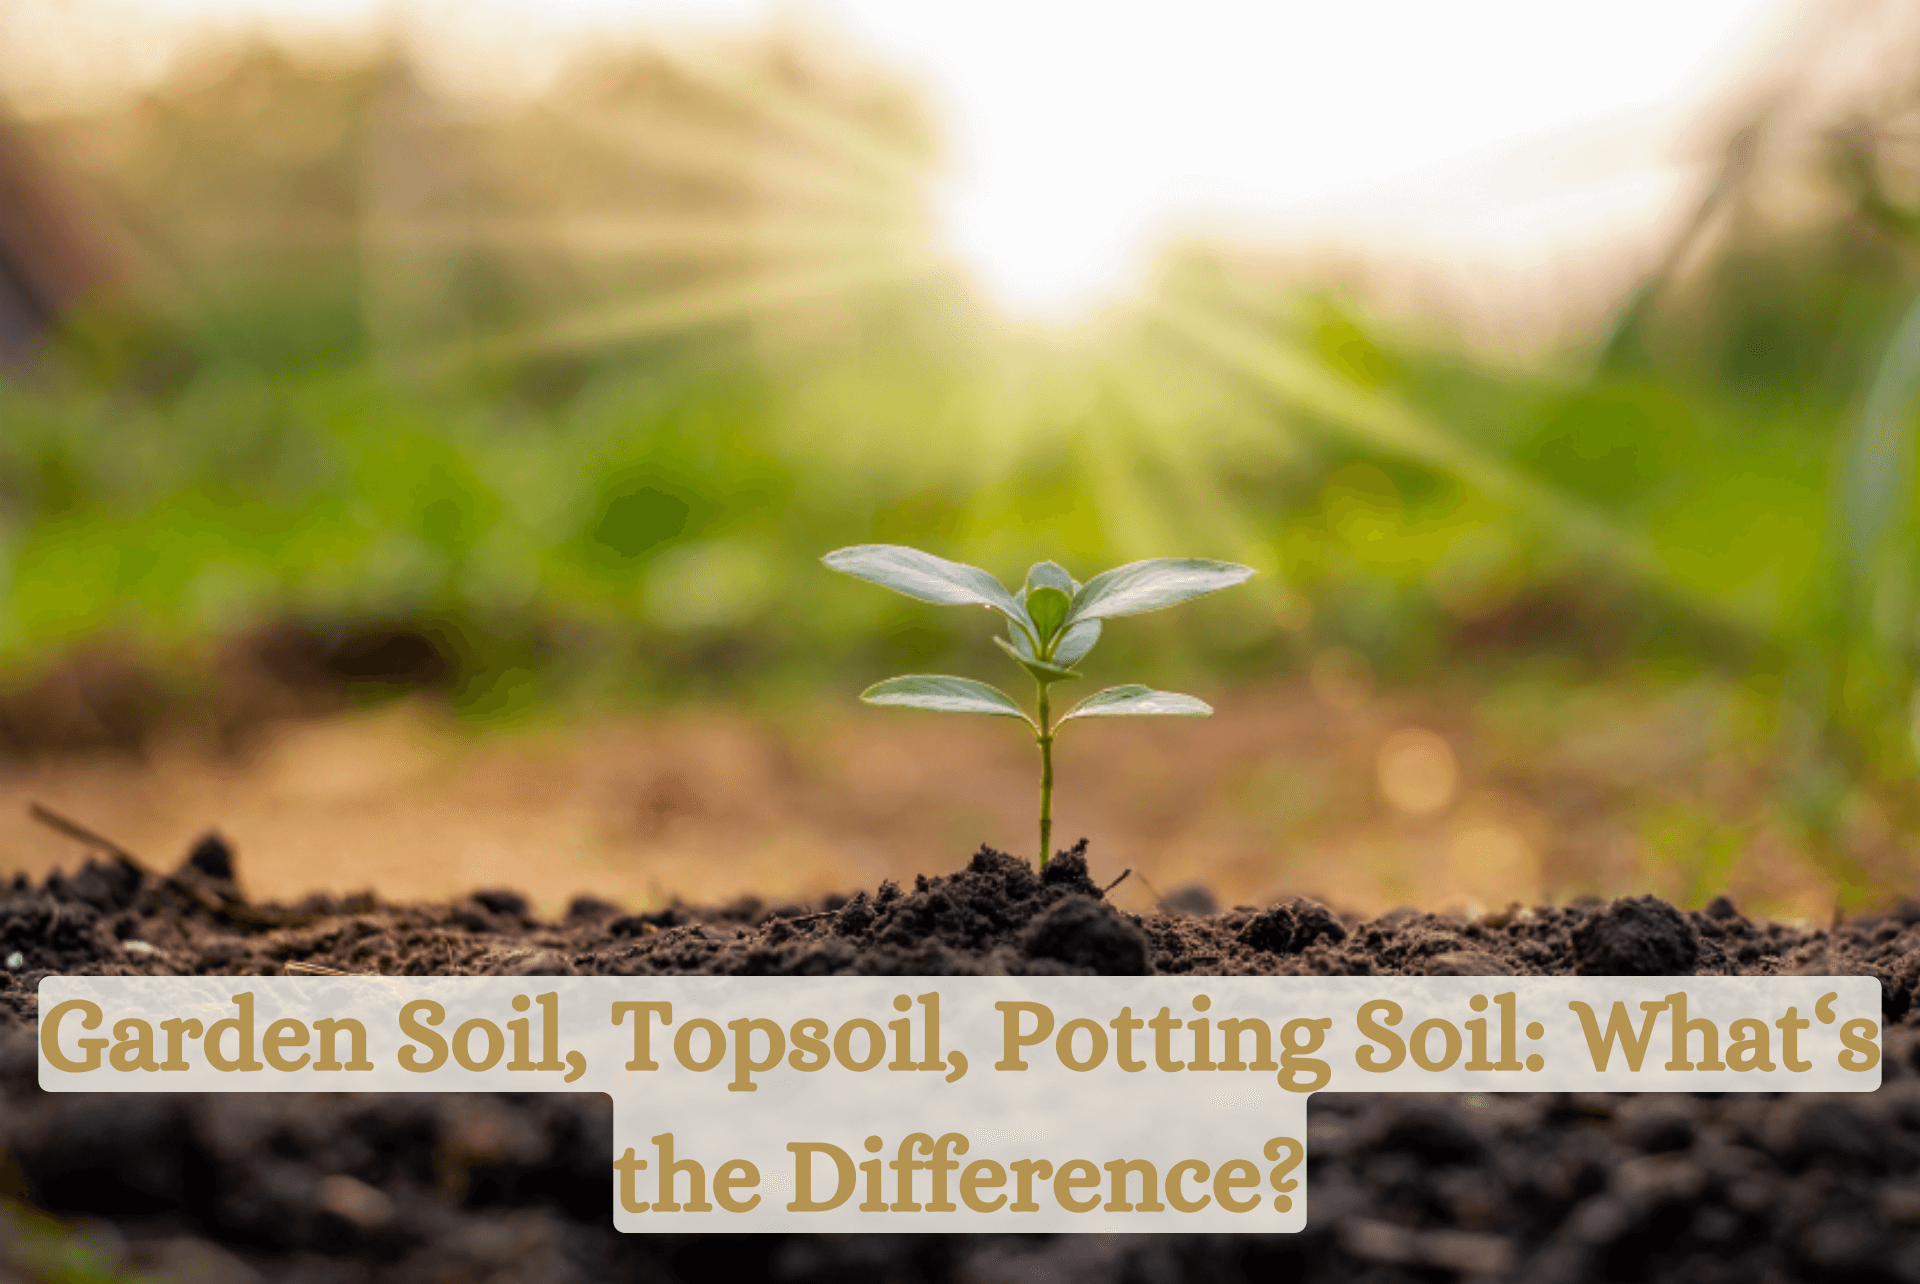 Planting Soil, Topsoil and Potting Soil: Is There a Difference?